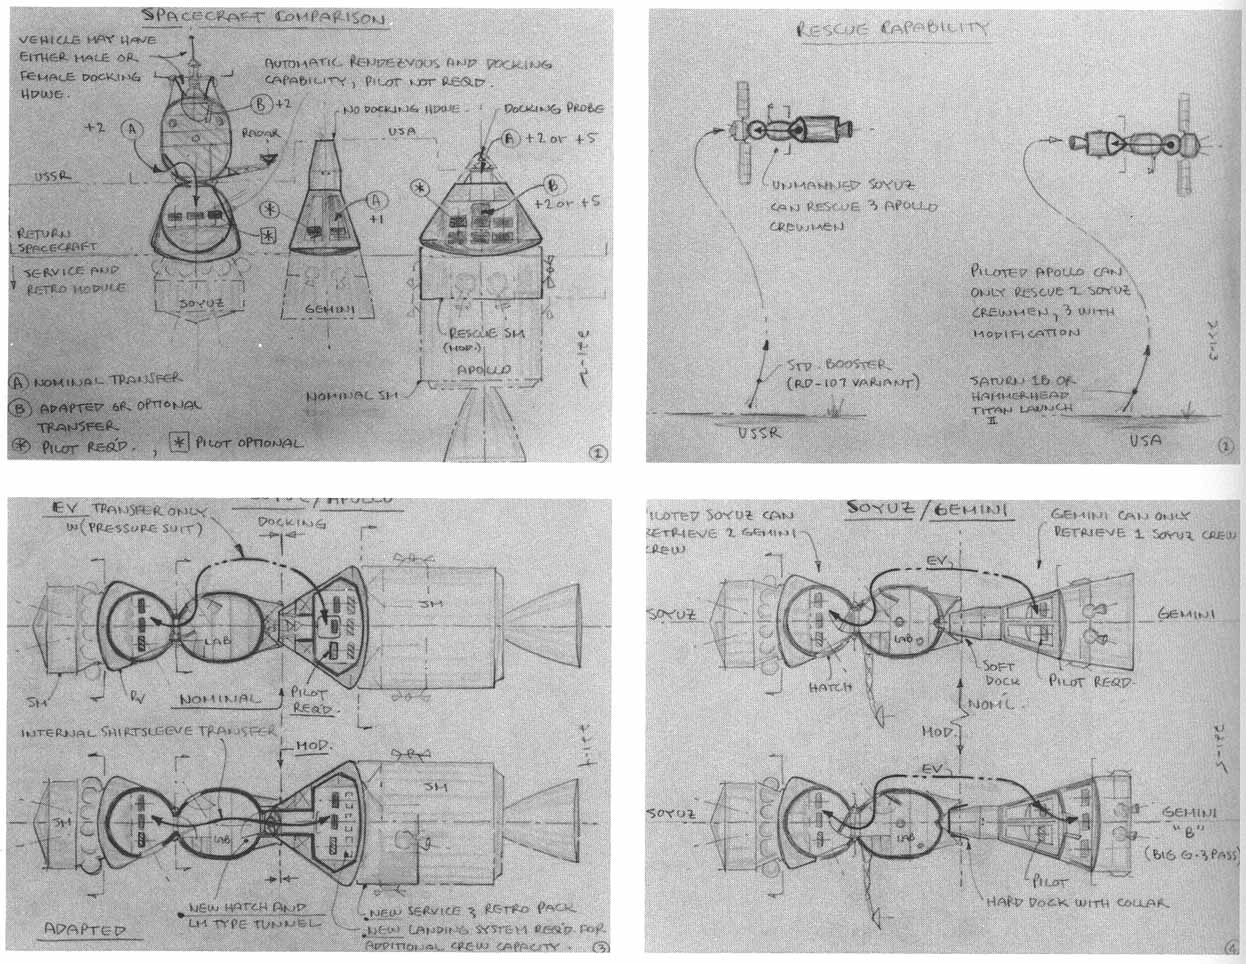 Comparison drawings of the Apollo and Soyuz